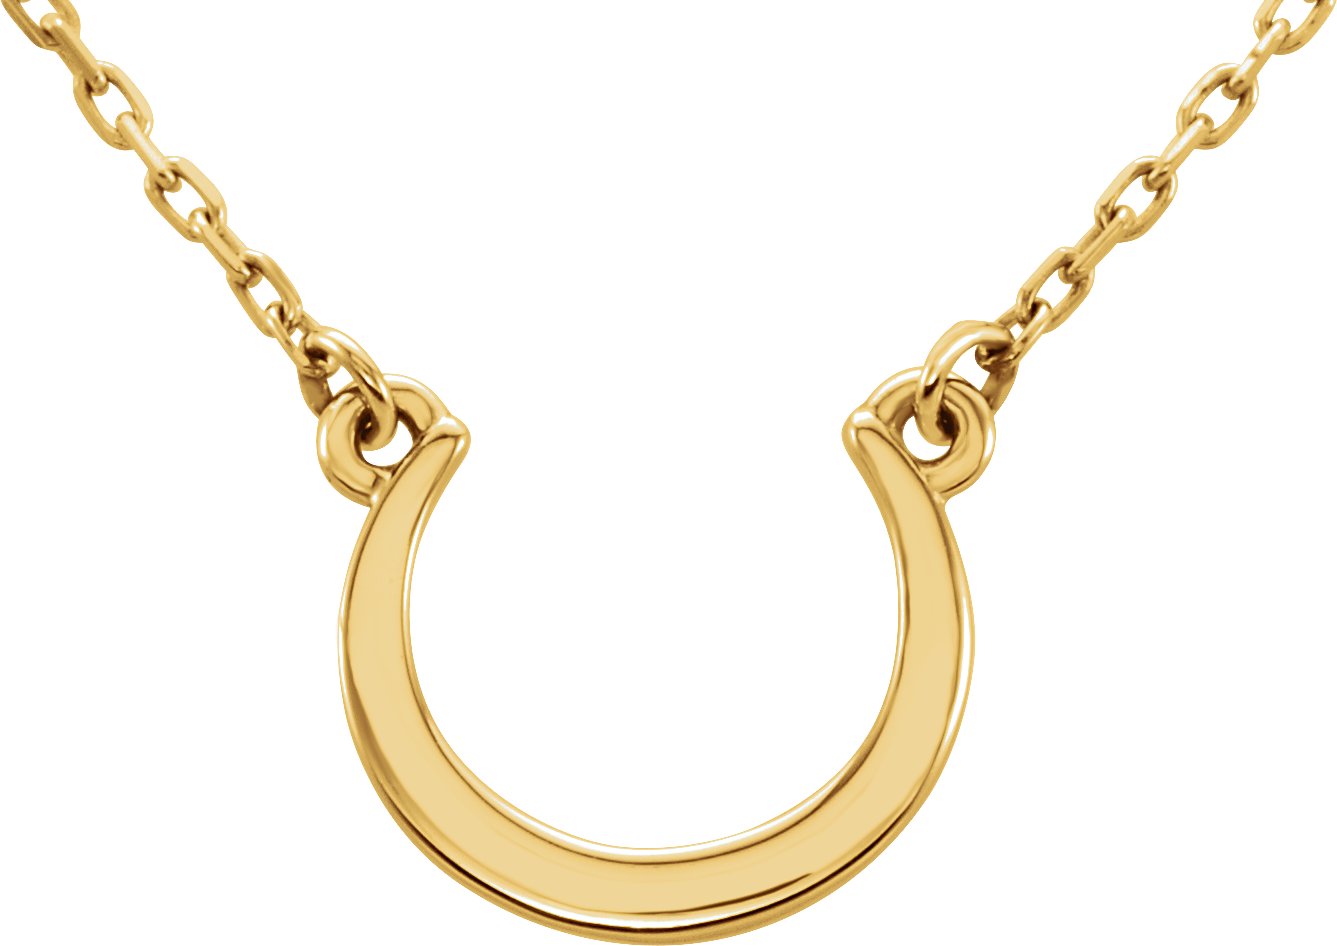 14K Yellow Crescent 18" Necklace